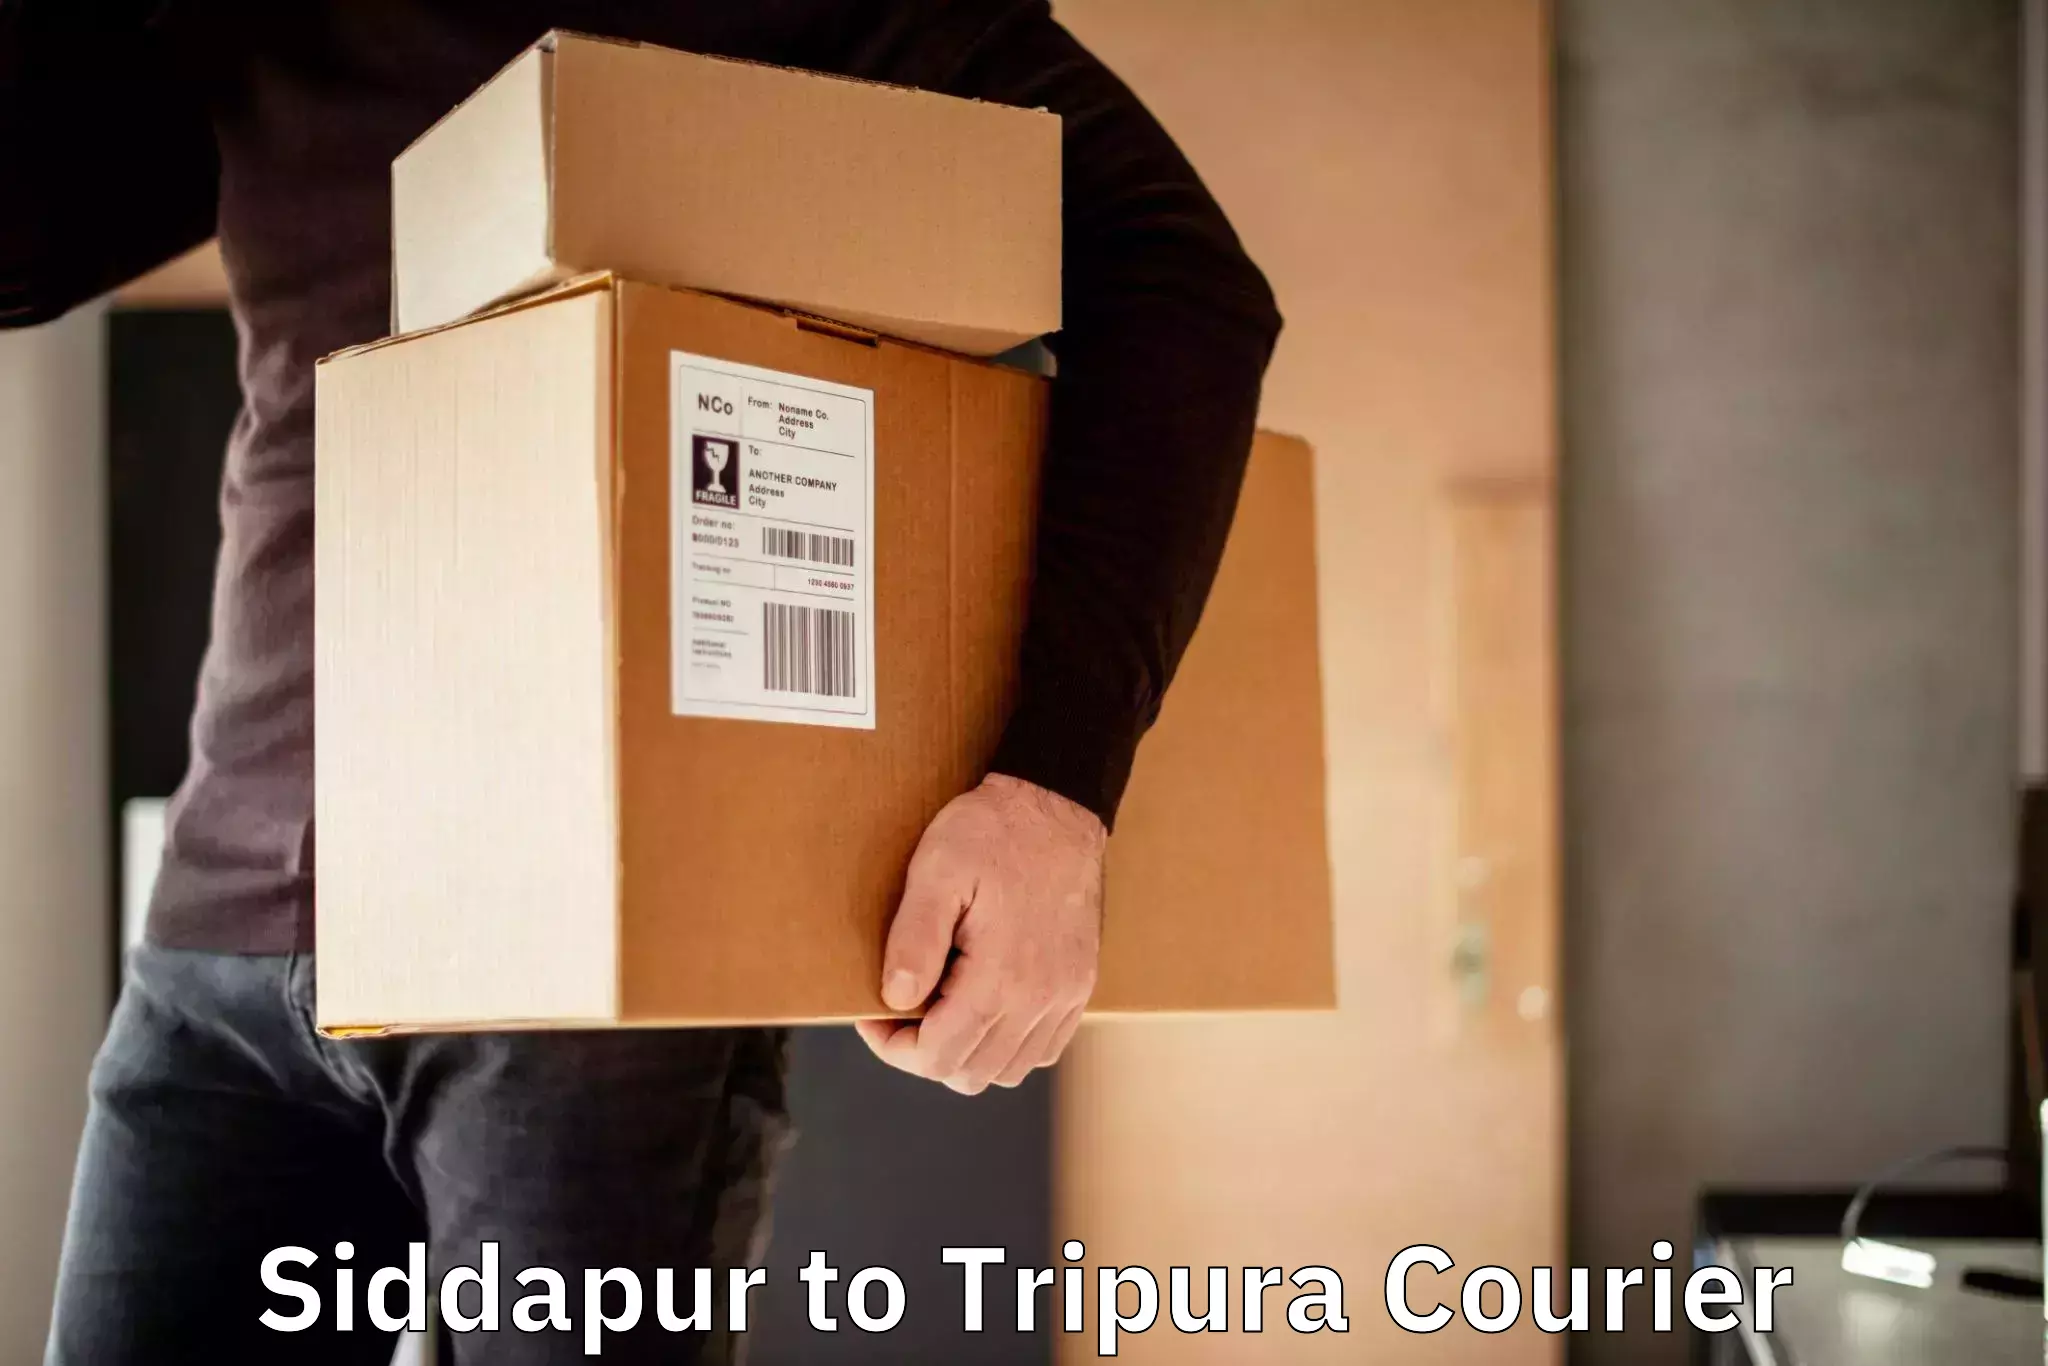 Professional courier handling Siddapur to Tripura